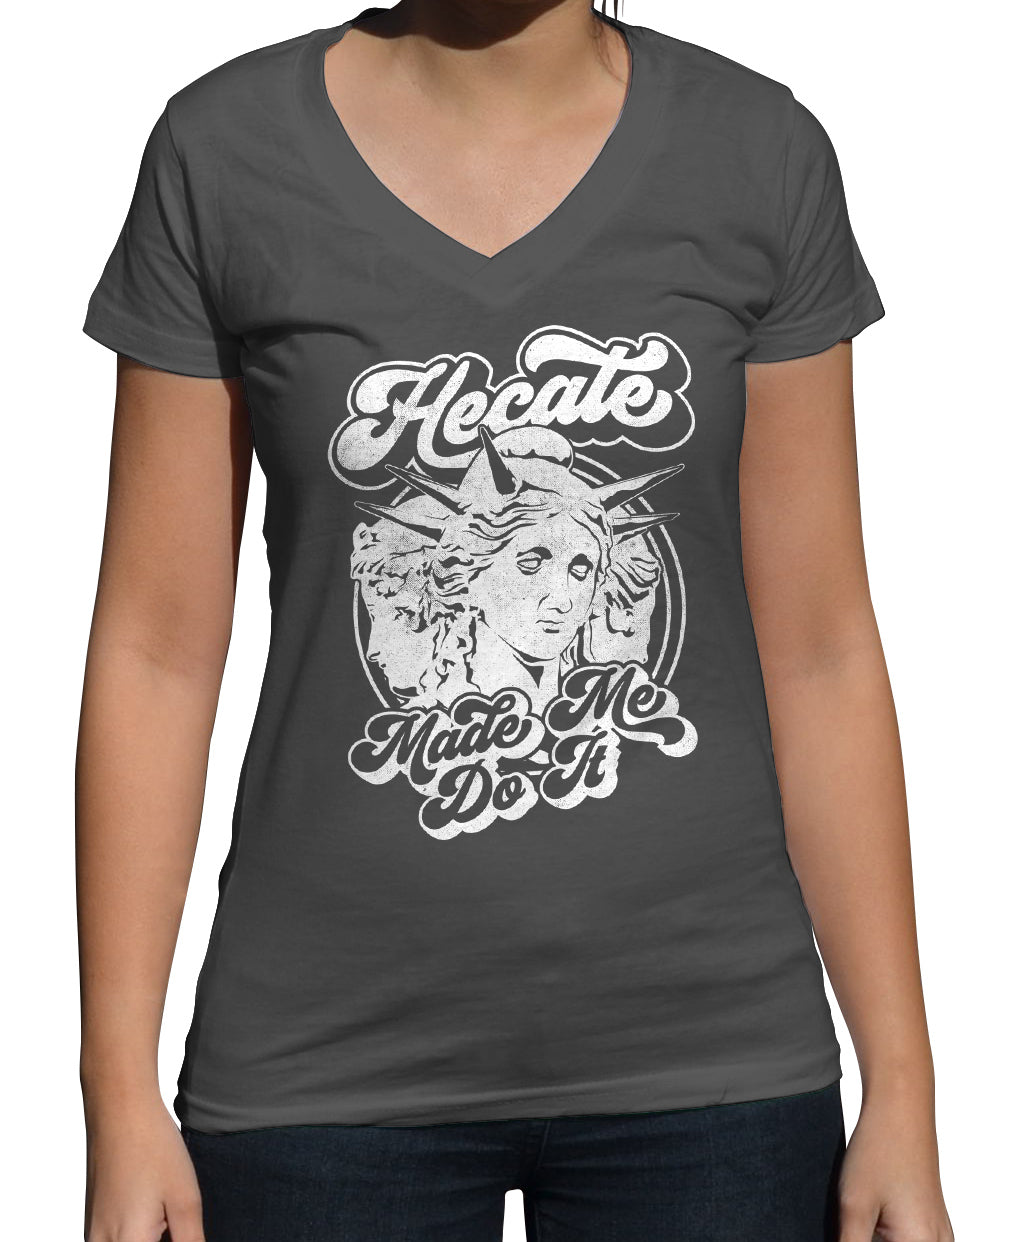 Women's Hecate Made Me Do It Vneck T-Shirt